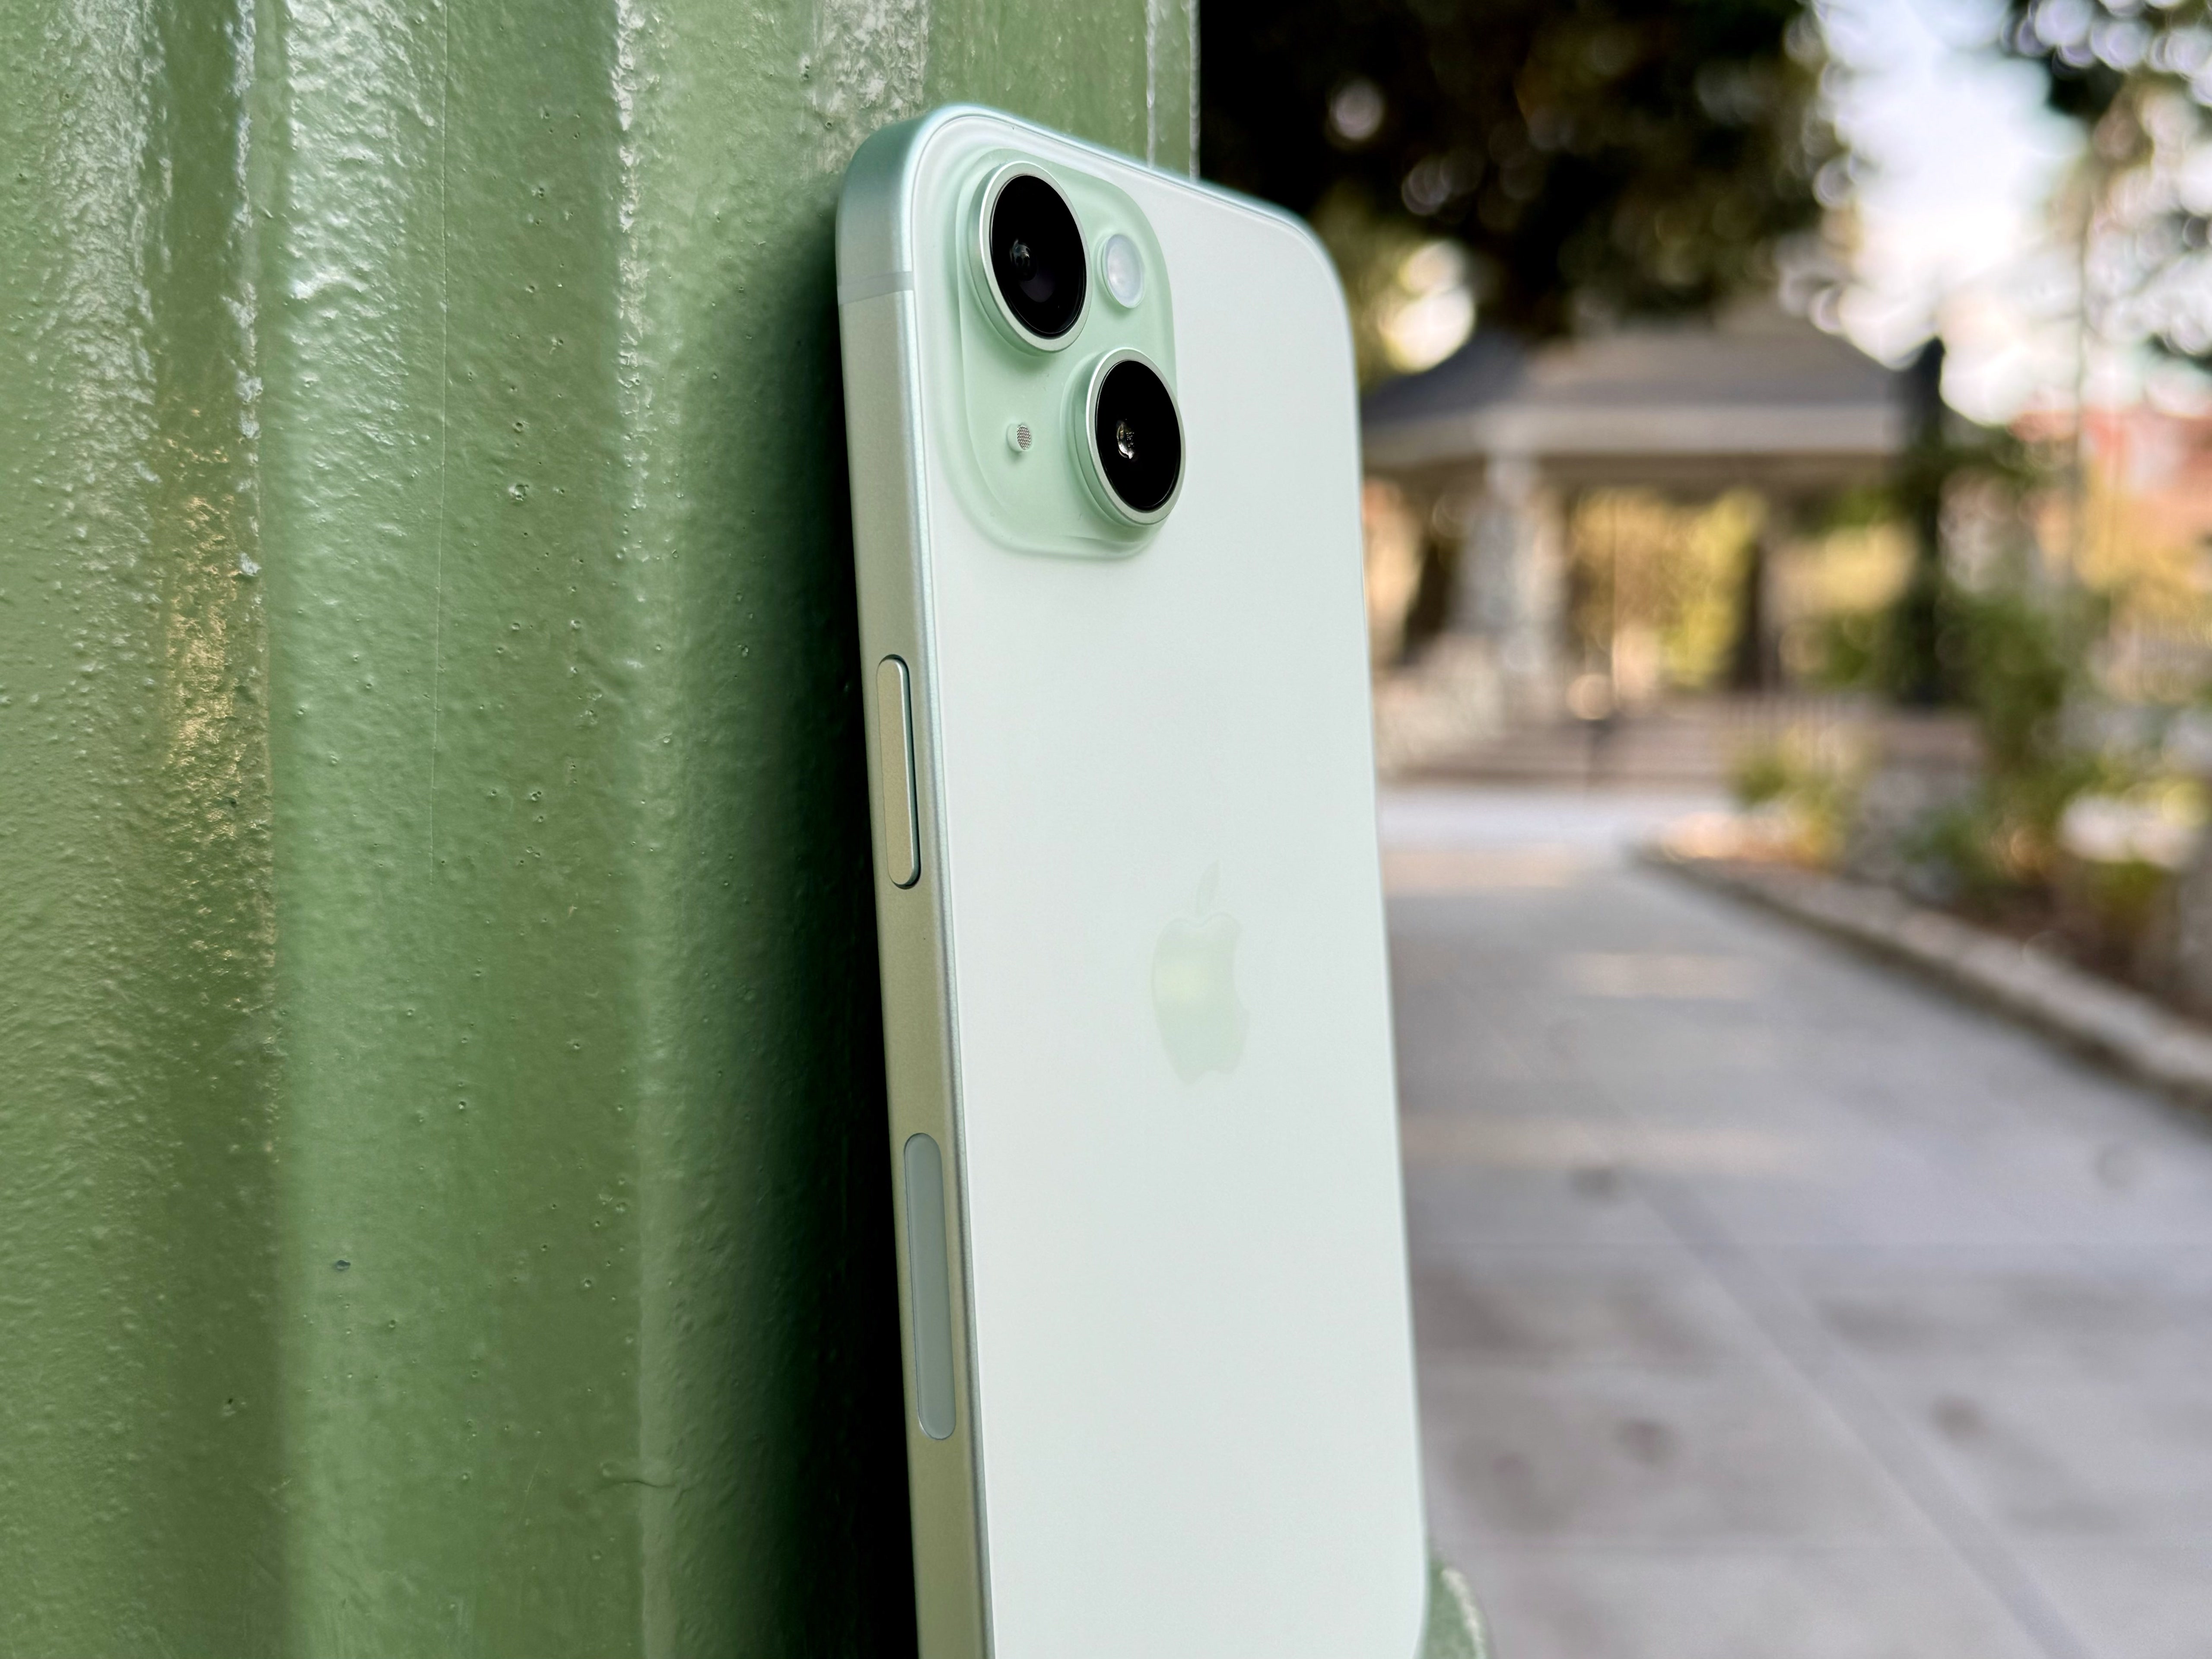 Apple introduces gorgeous new green finishes for the iPhone 13 lineup -  Apple